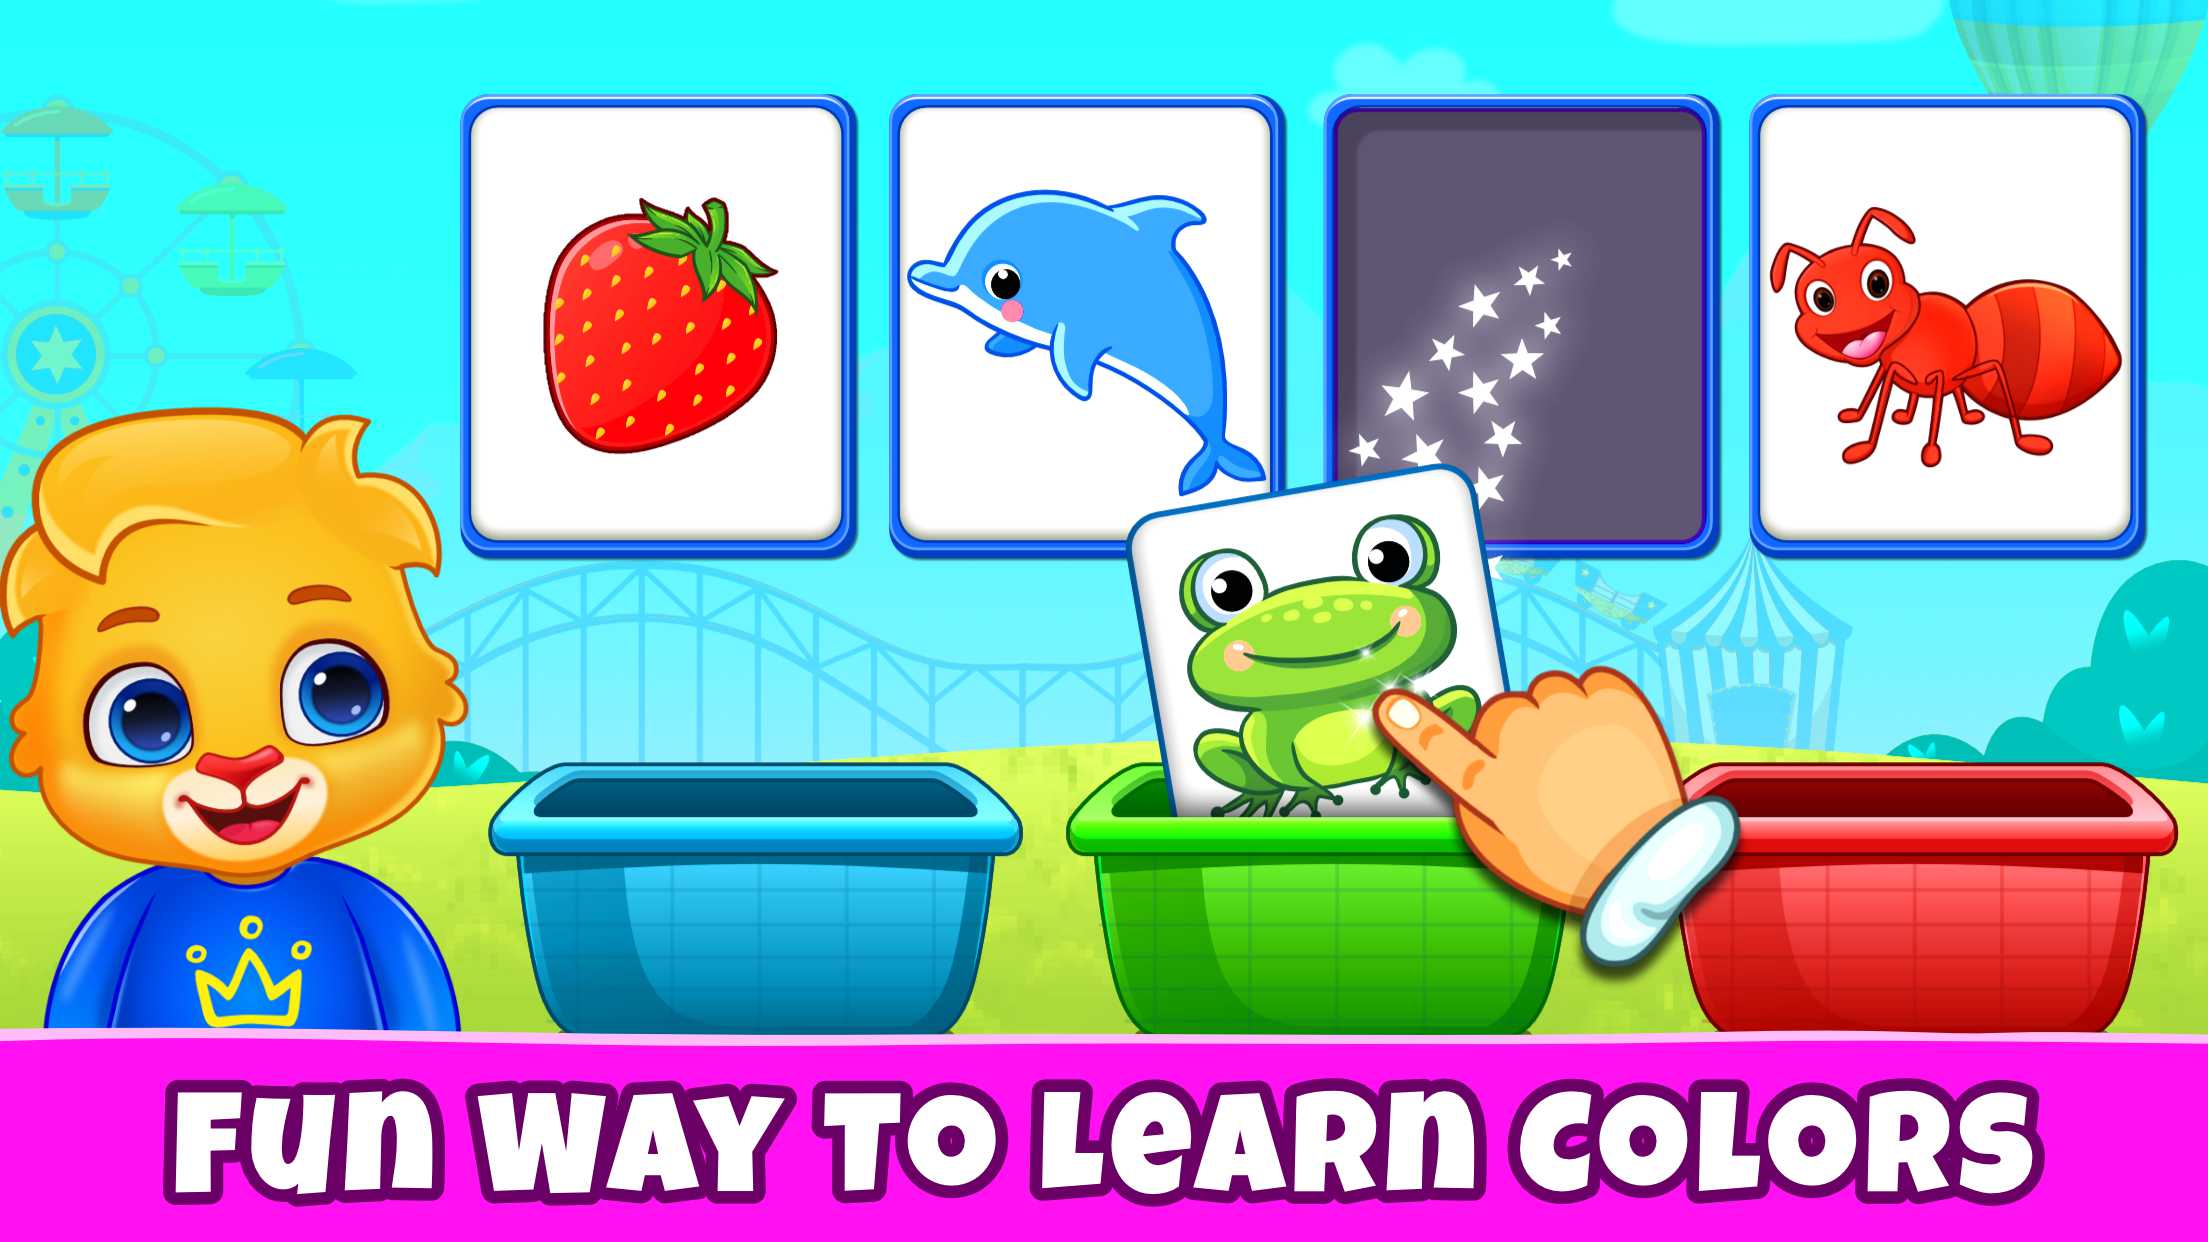 50 free mobile games for kids to learn and have fun!